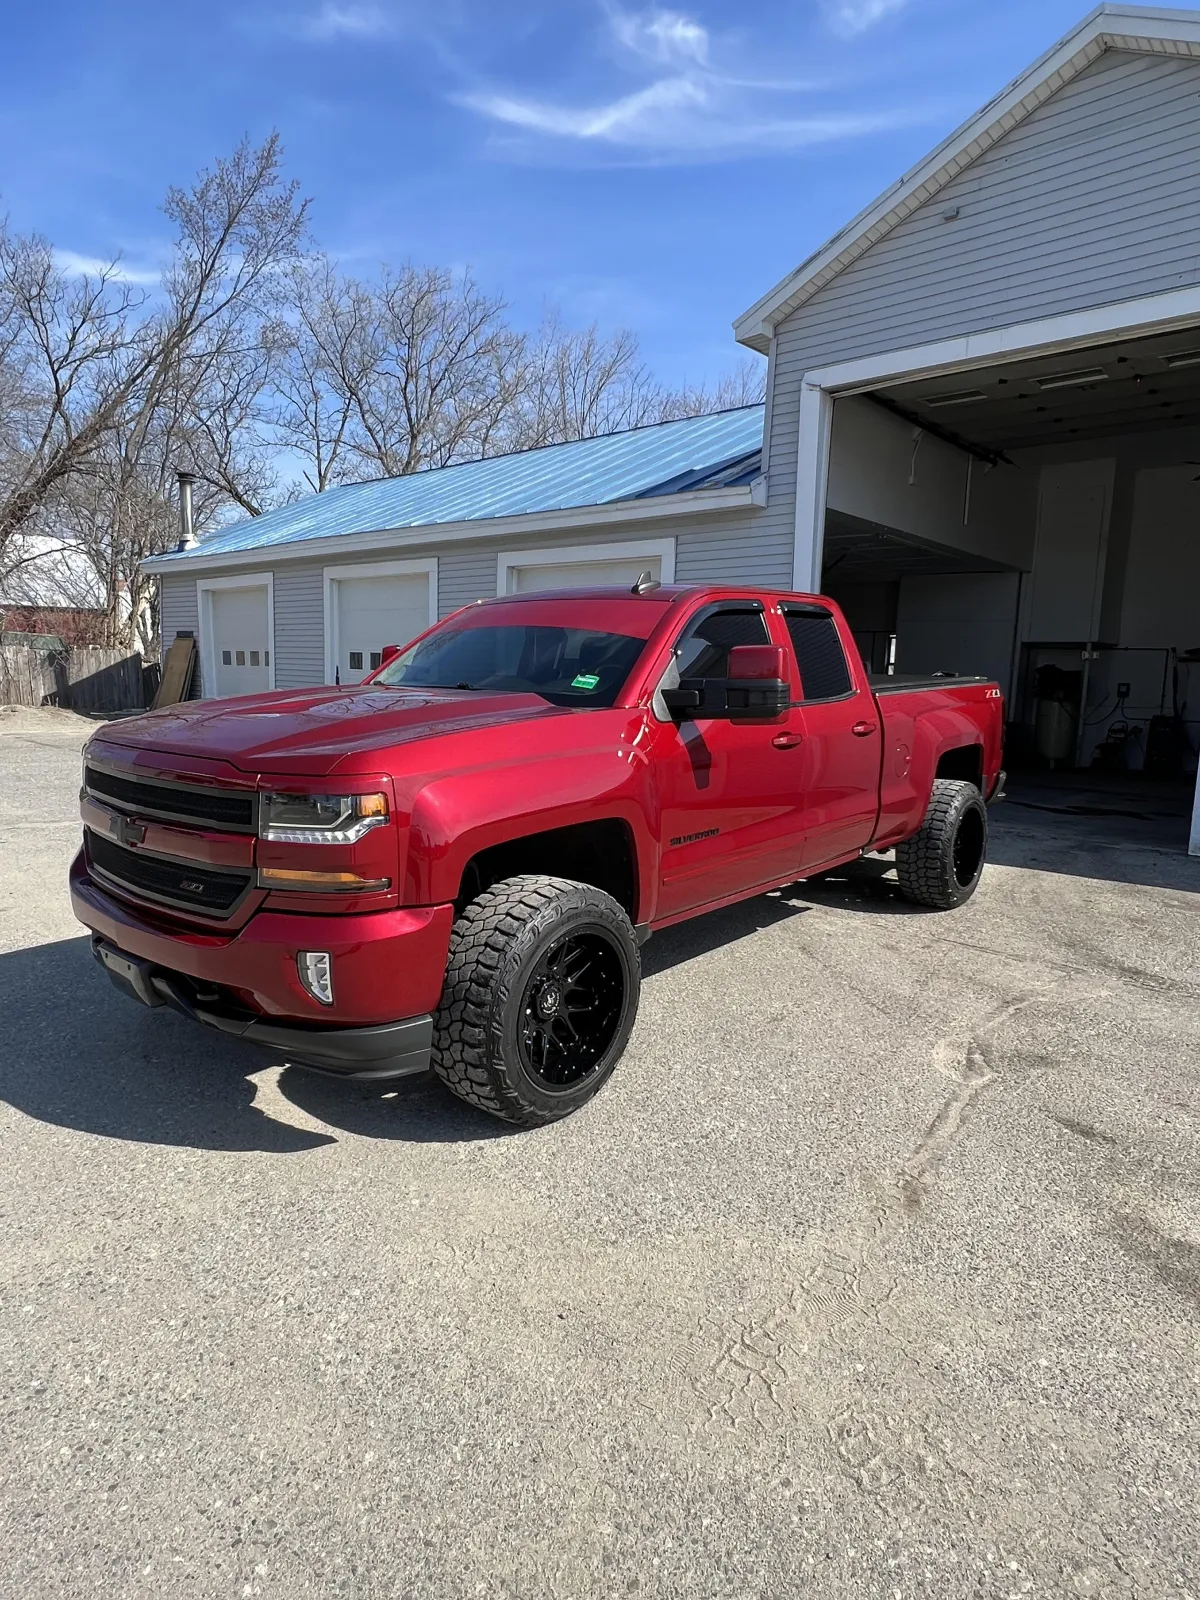 Truck Detailing in Central Maine